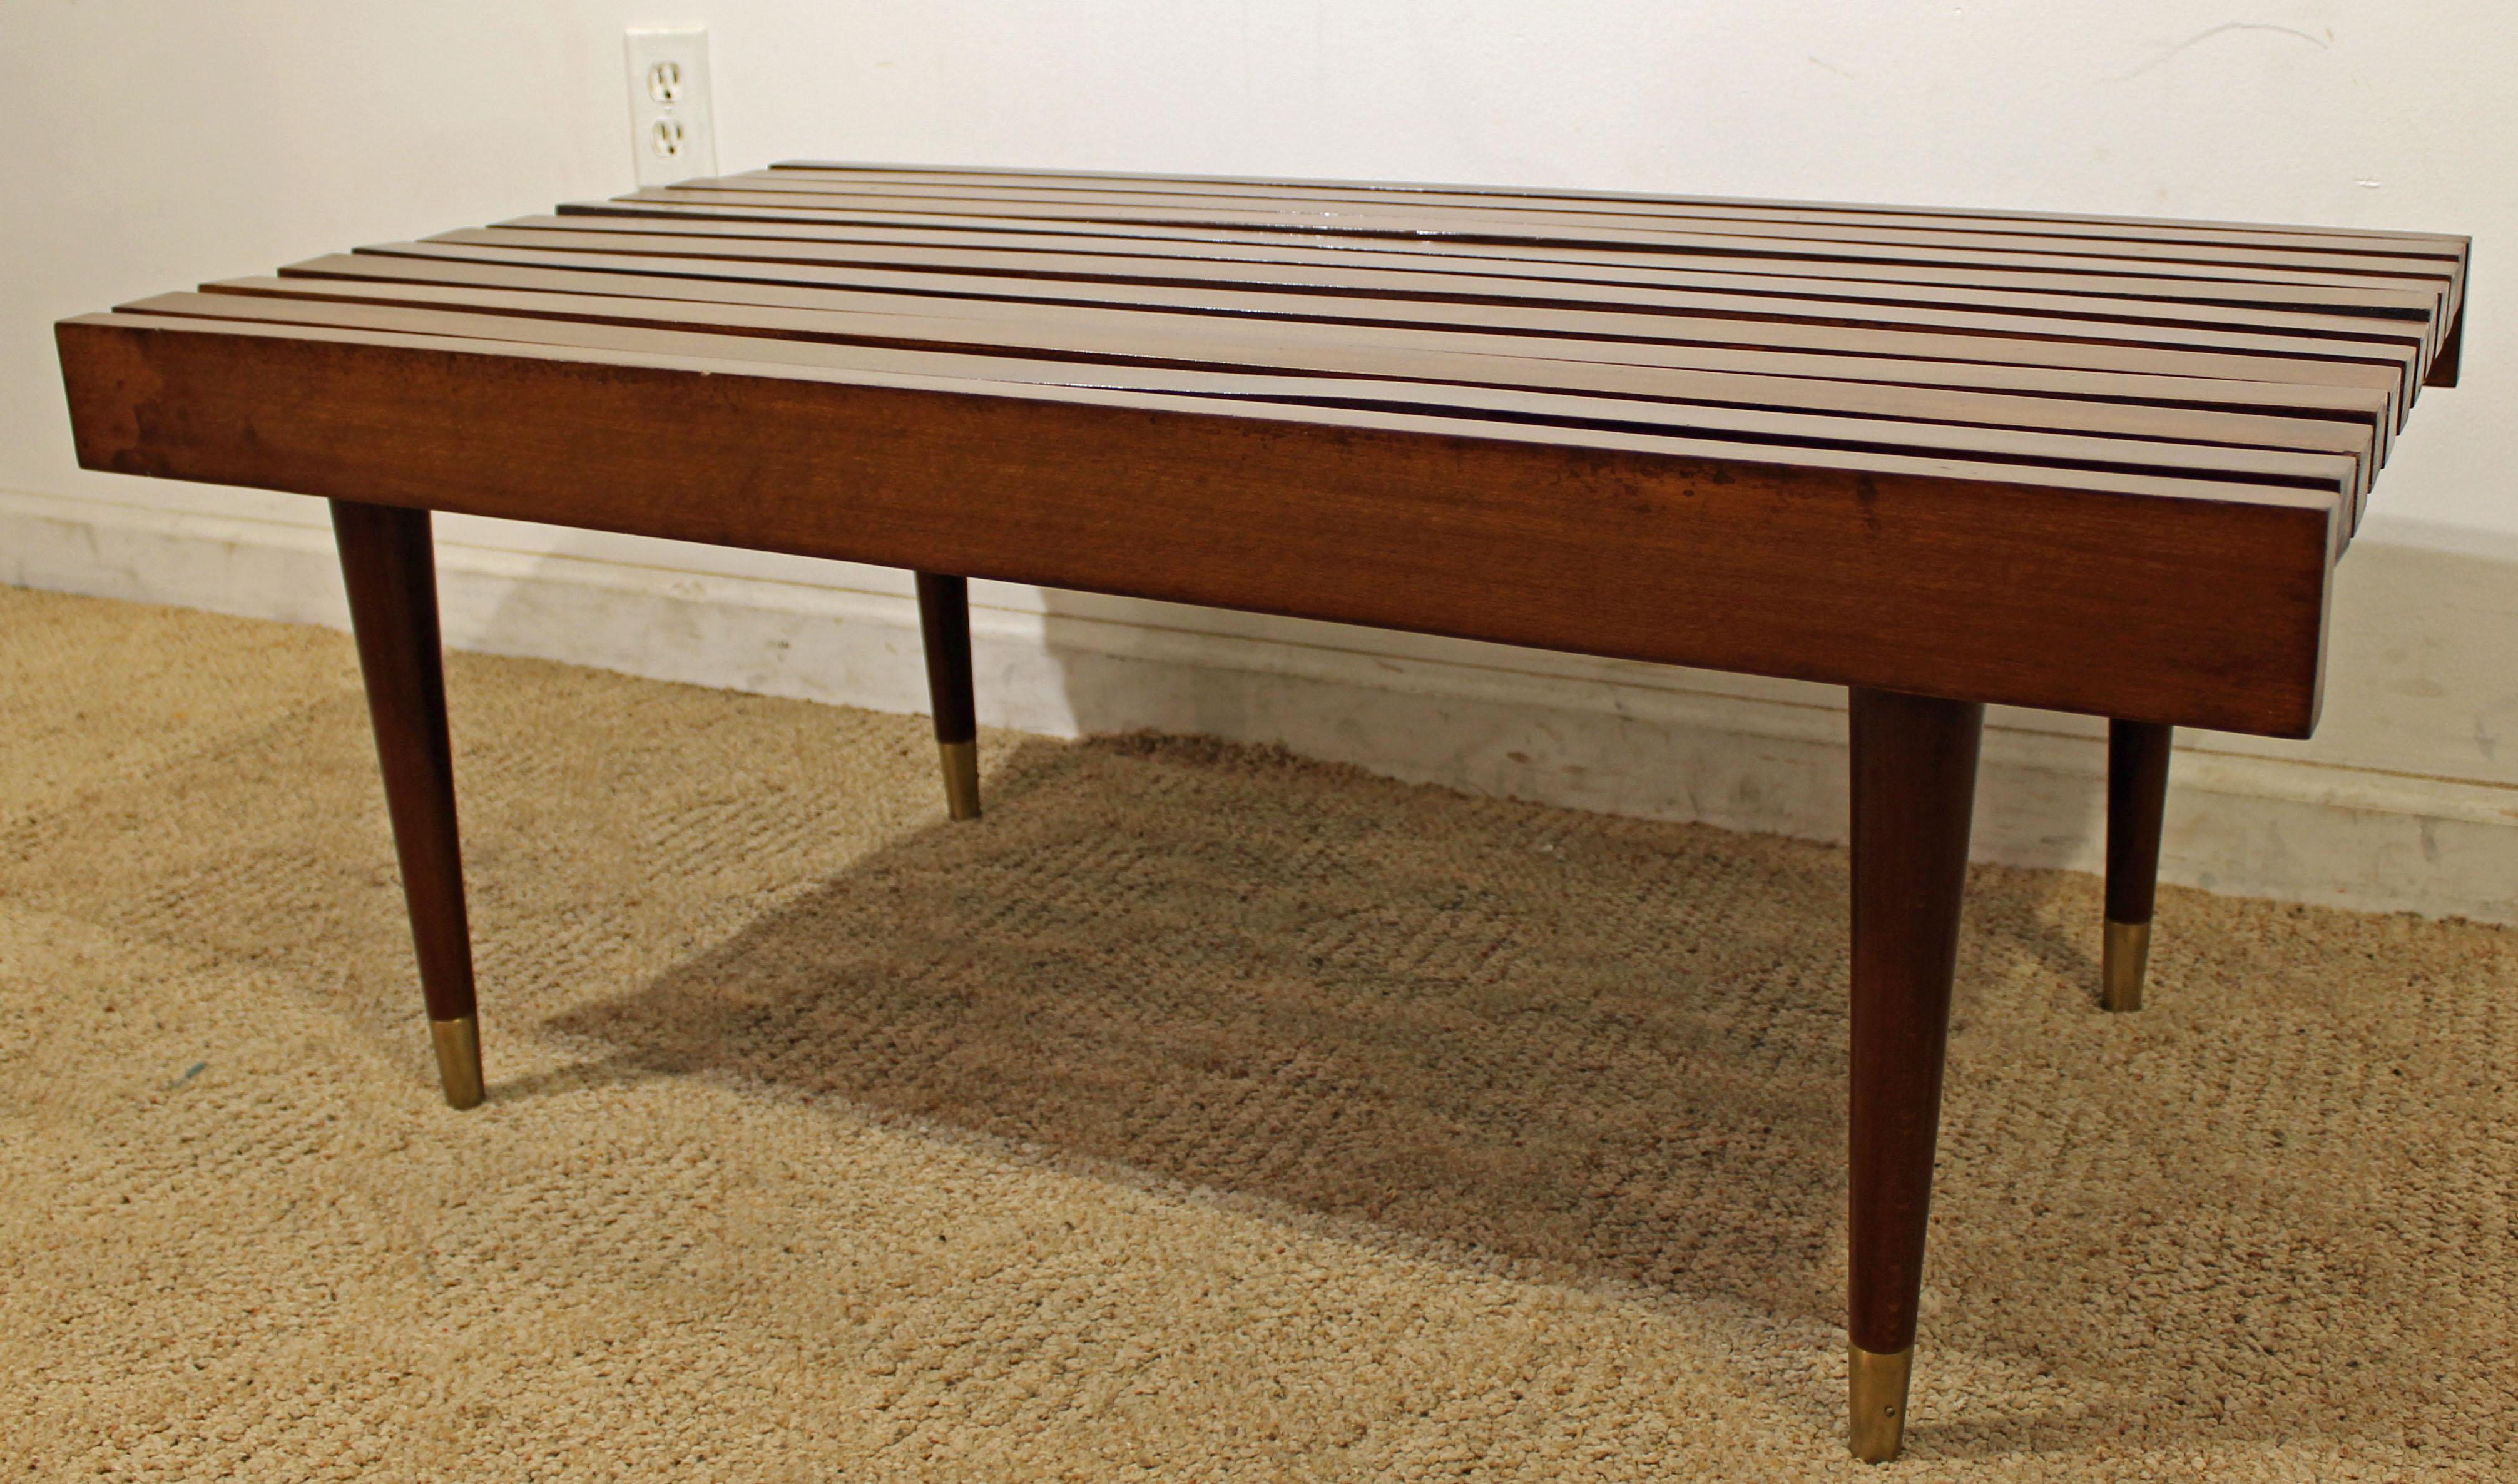 What a find. Offered is a midcentury coffee table. It is made of walnut with brass feet. The piece shows minor wear (minor surface wear/chips, some boards slightly warped, age wear-- see pictures) but nothing overly noticeable. It is not signed.